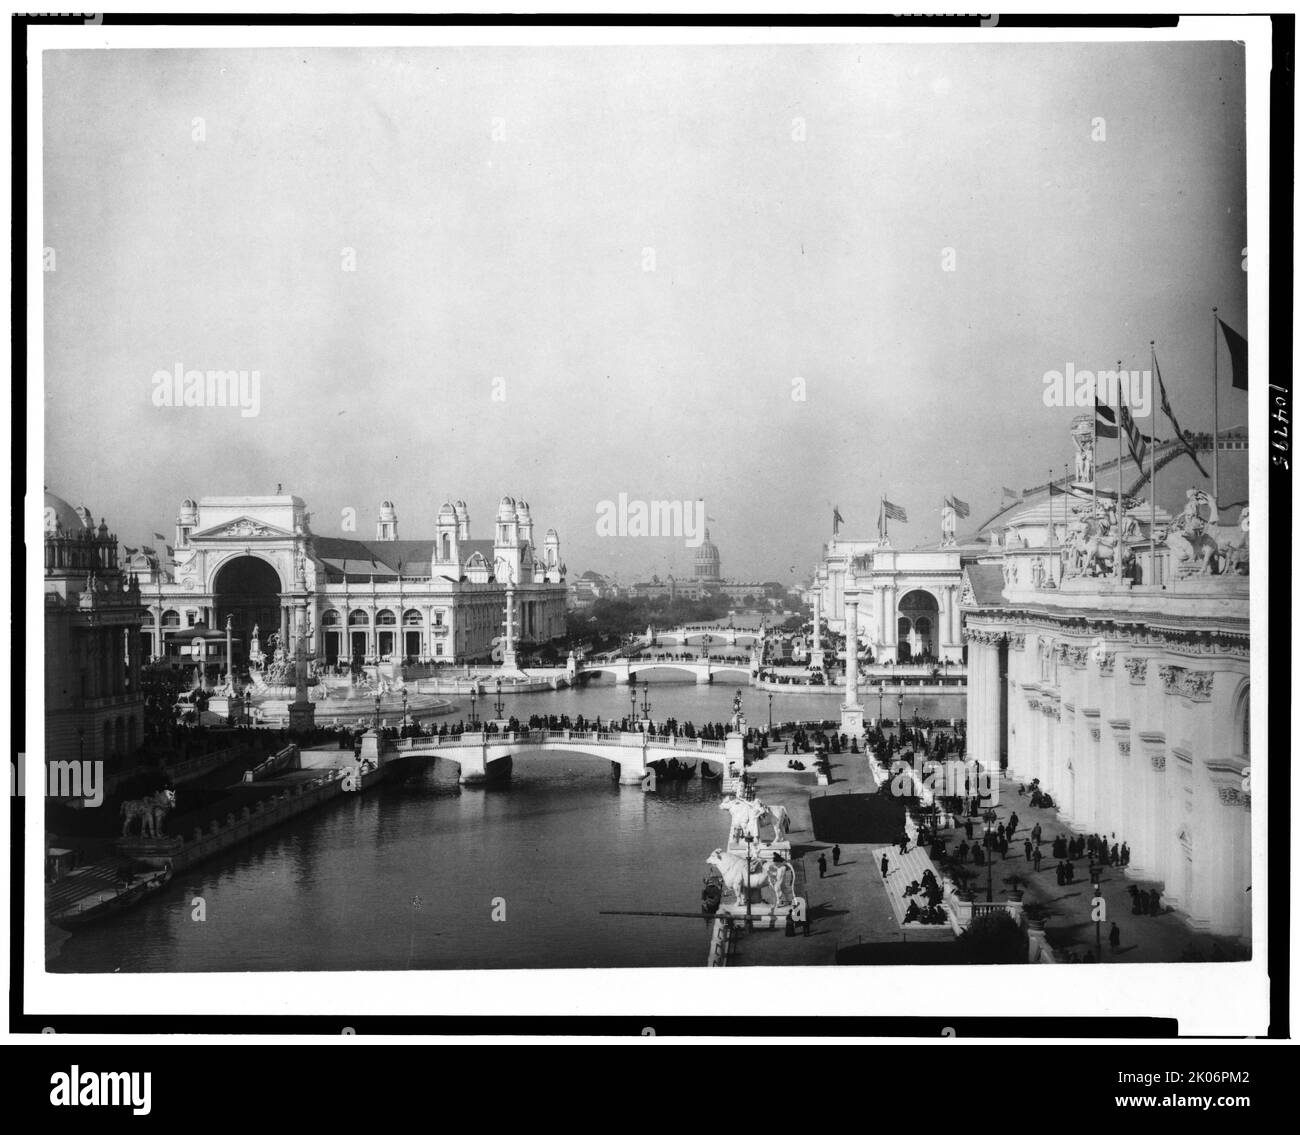 Exposition grounds, World's Columbian Exposition, Chicago, 1893. Stock Photo